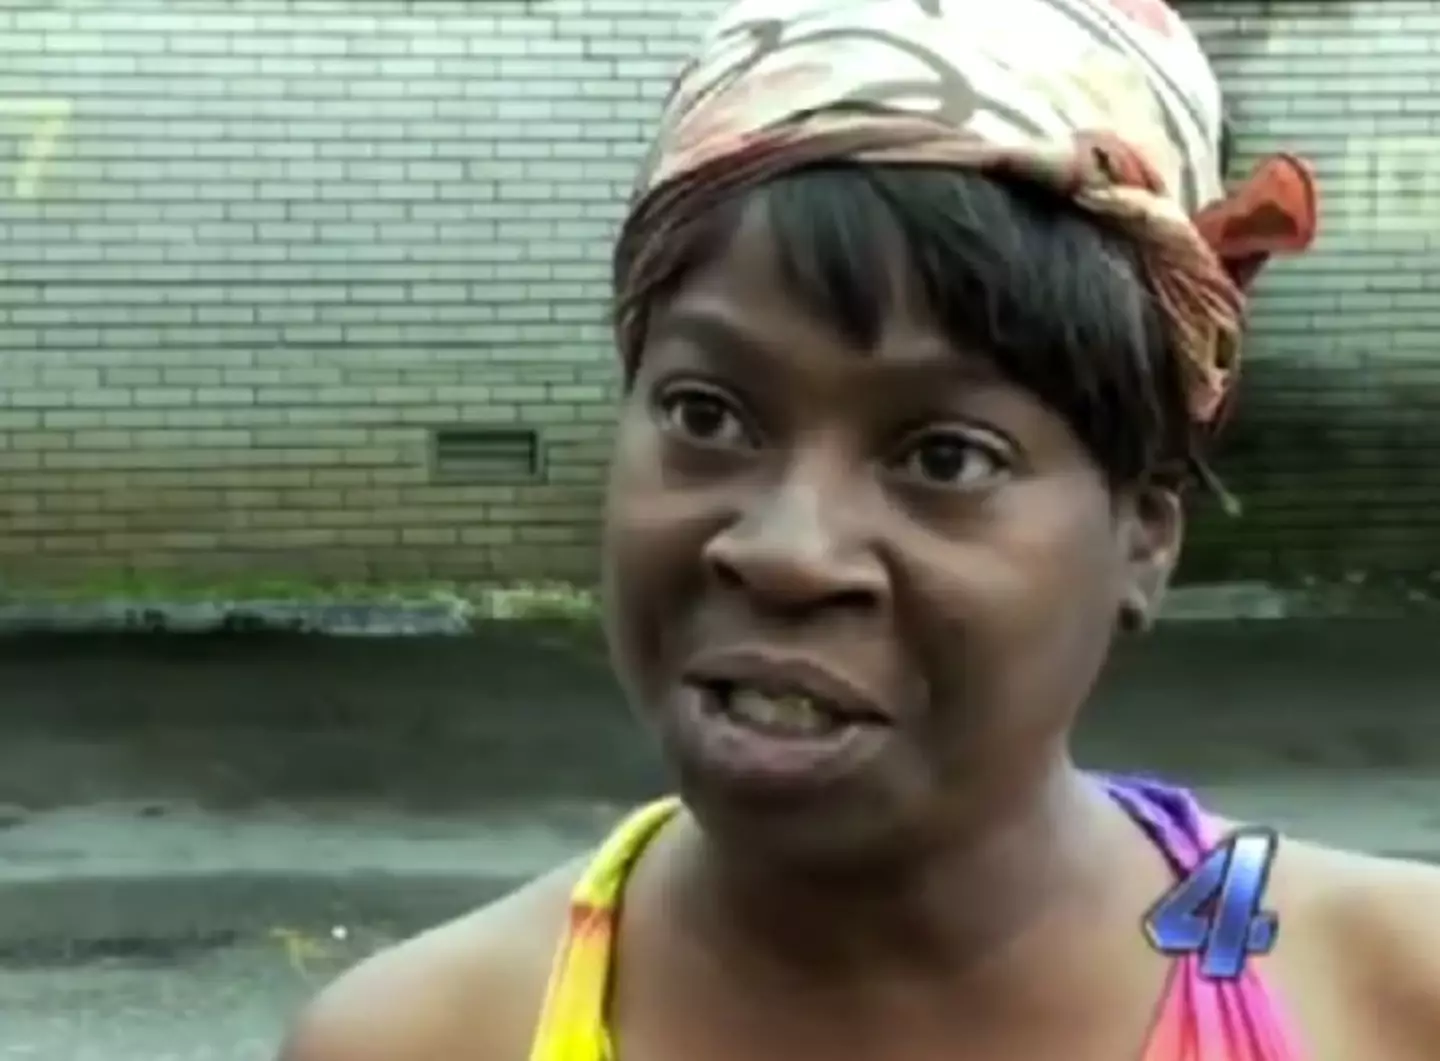 It's been 10 years since Sweet Brown's interview went viral.